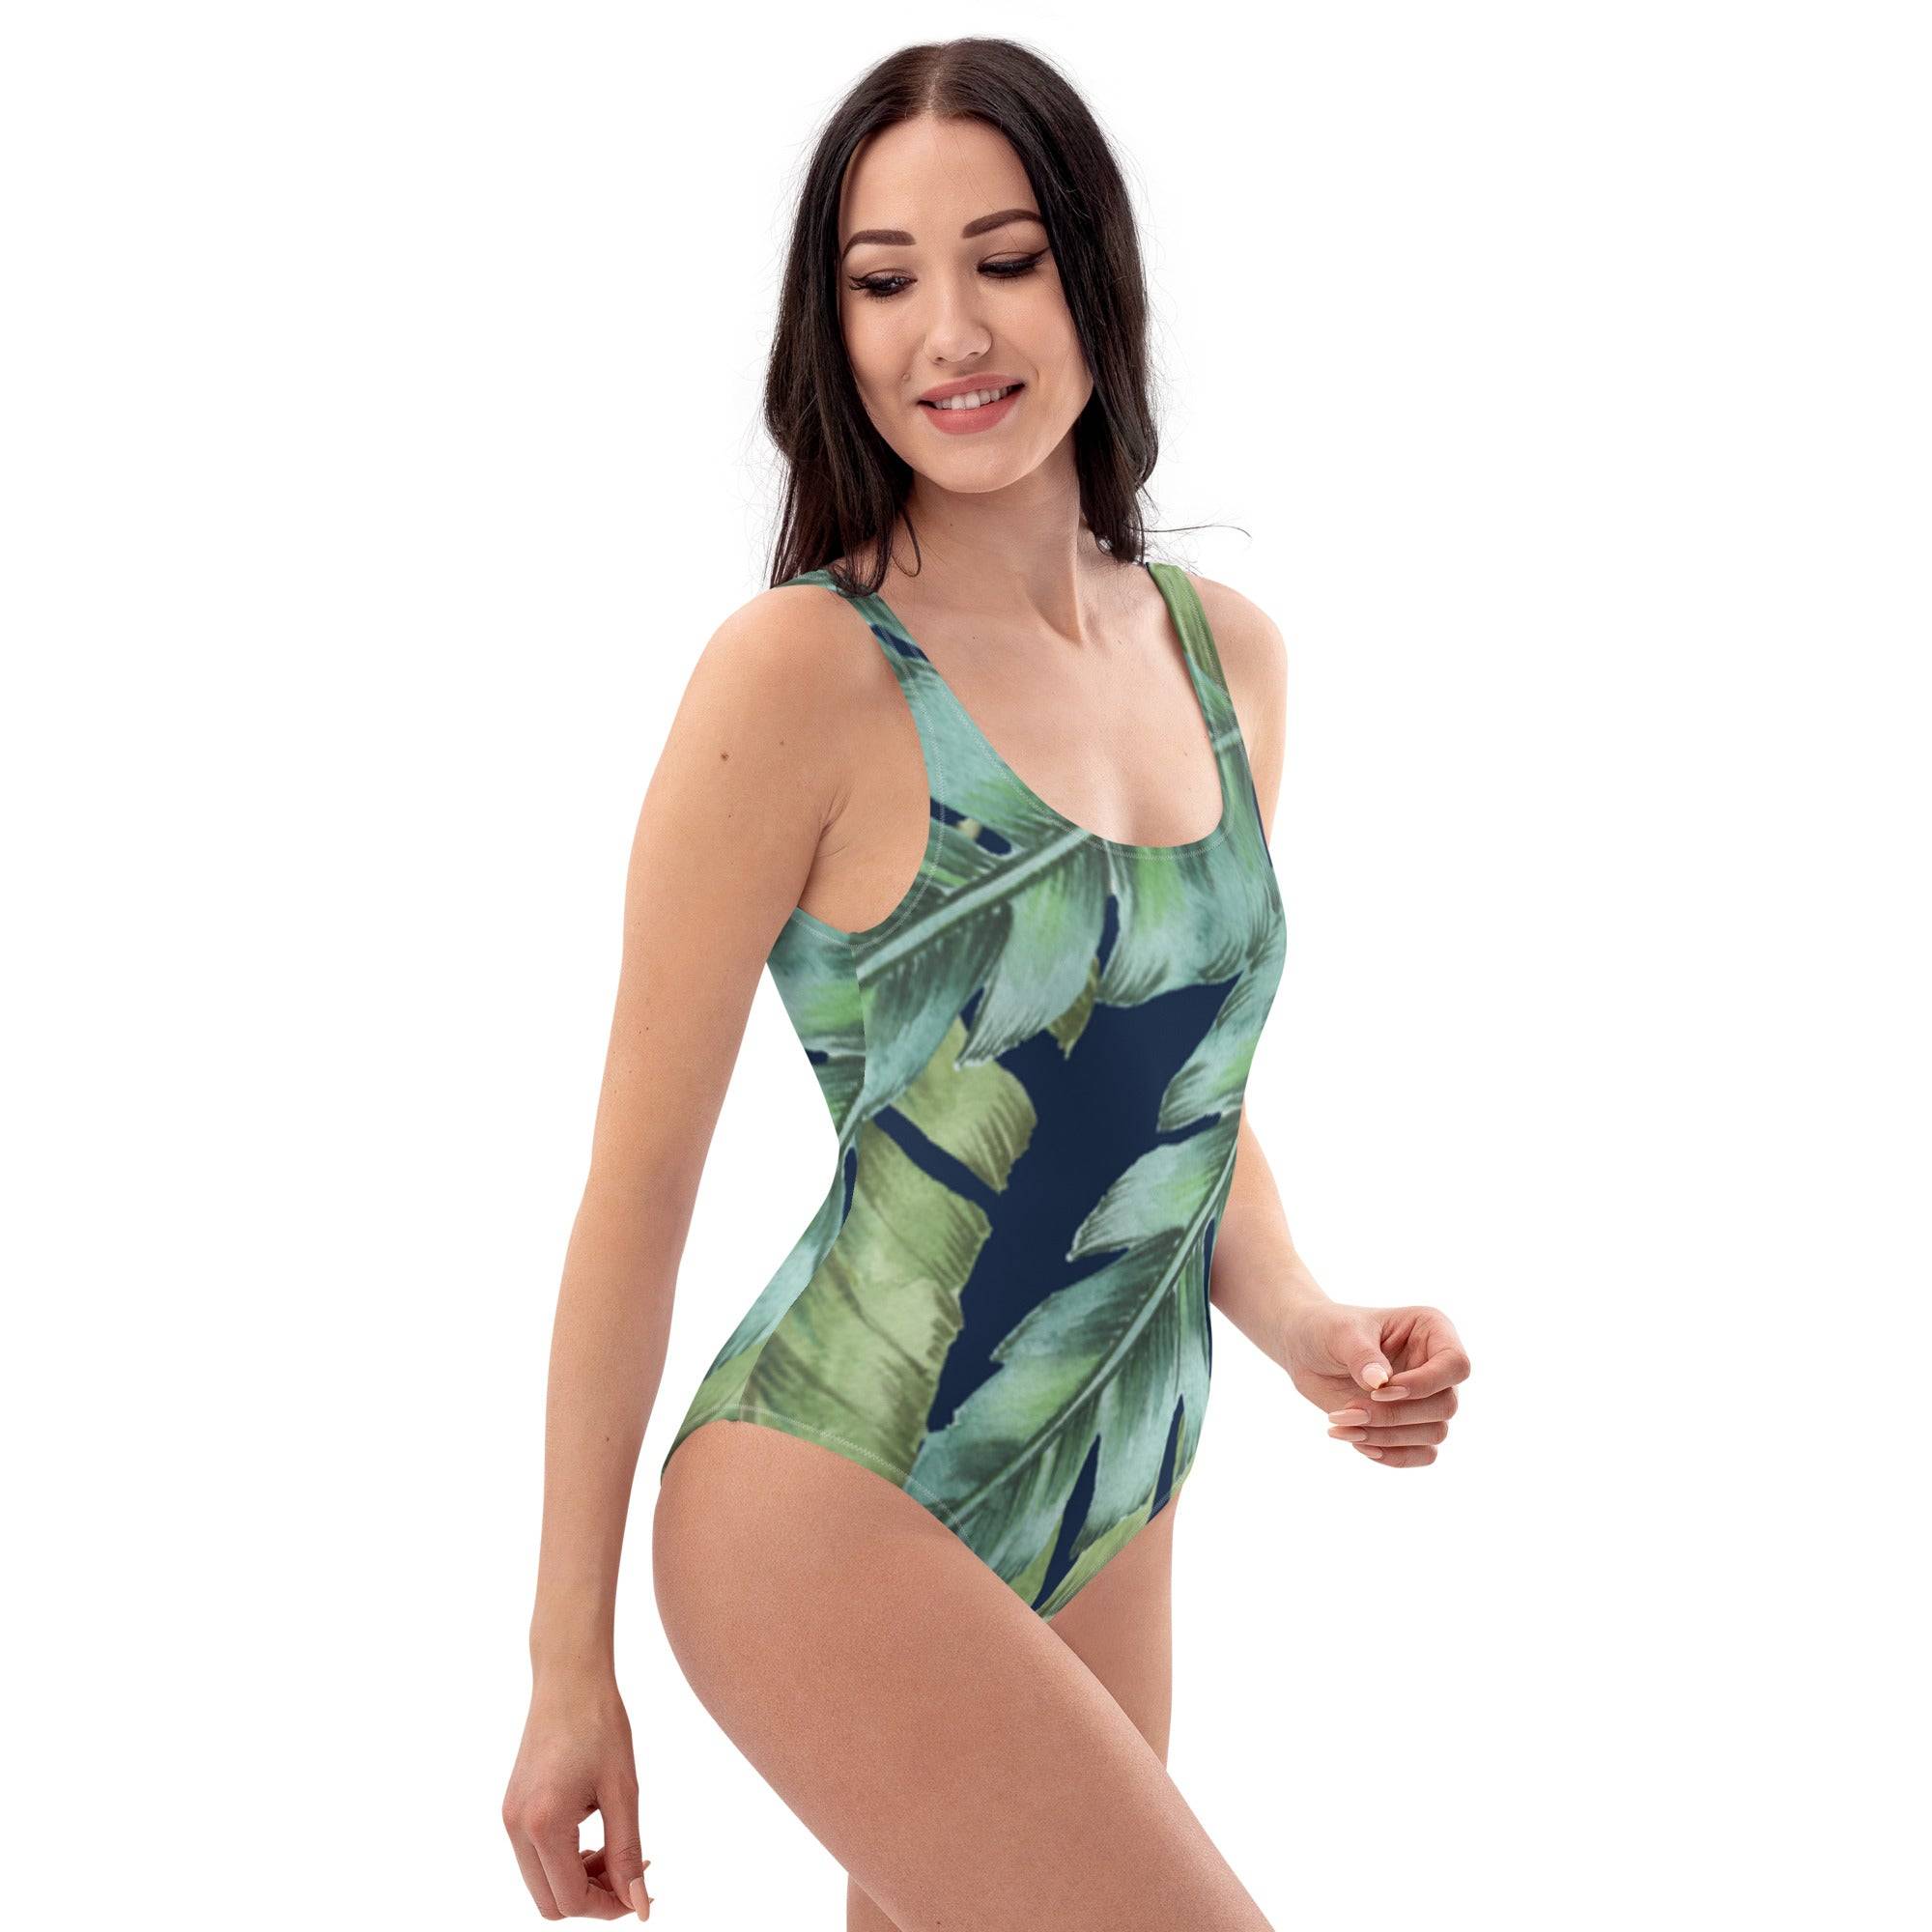 Flora One-Piece Swimsuit | One Piece Swimwear Australia - Revive Wear     One Piece Swimwear Australia. Find Your Perfect Fit. Low scoop back with a Cheeky Fit, This Swimsuit Is Perfect For Any Activity. Browse Sizes today.